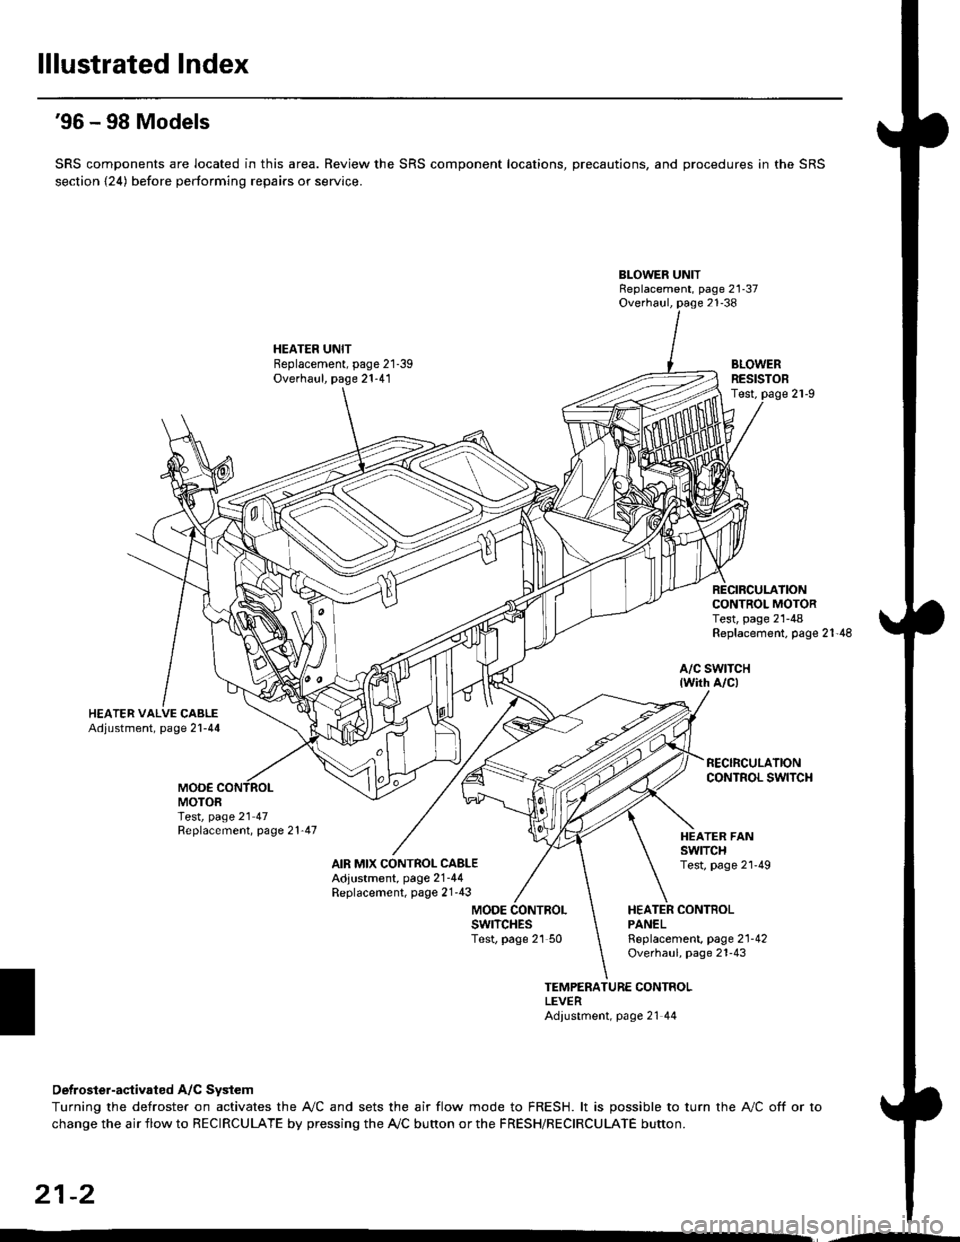 HONDA CIVIC 2000 6.G Owners Guide lllustrated Index
96 - 98 Models
SRS components are located in this area. Review the SRS component locations, precautions, and procedures in the SRS
section {24) before performing repairs or service.